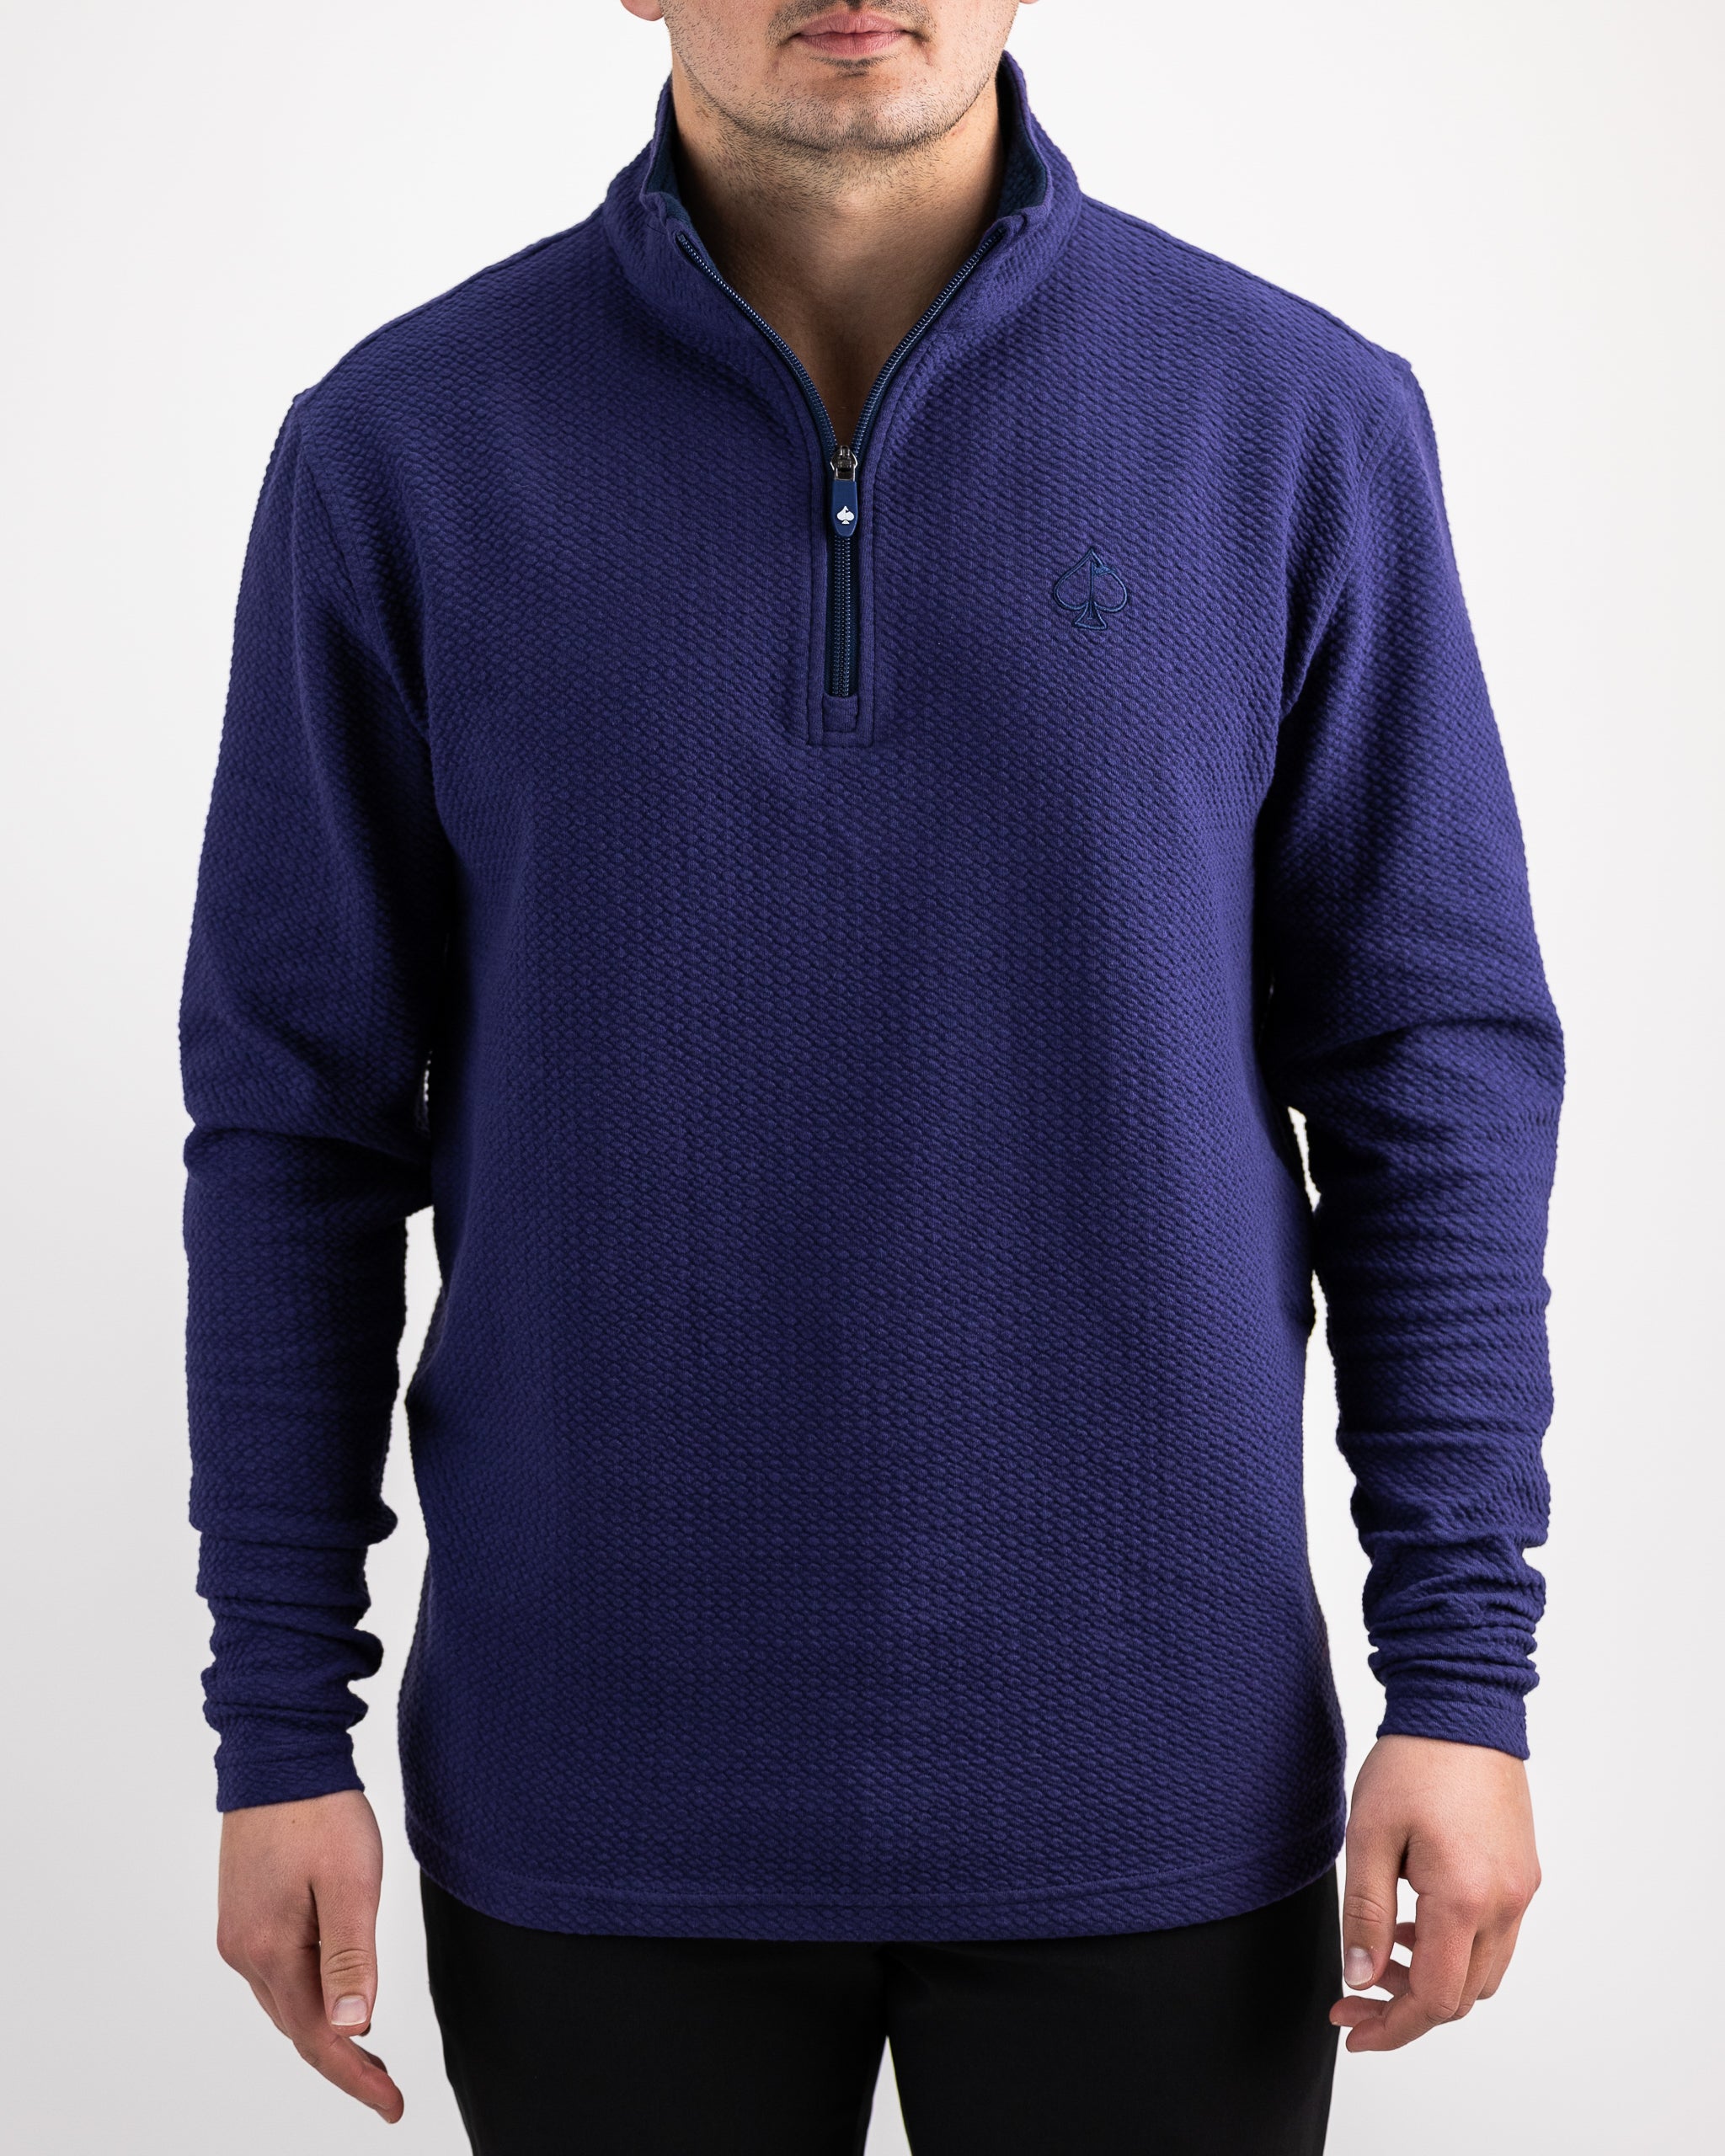 Player Preferred™ Waffle Knit Pullover - Navy